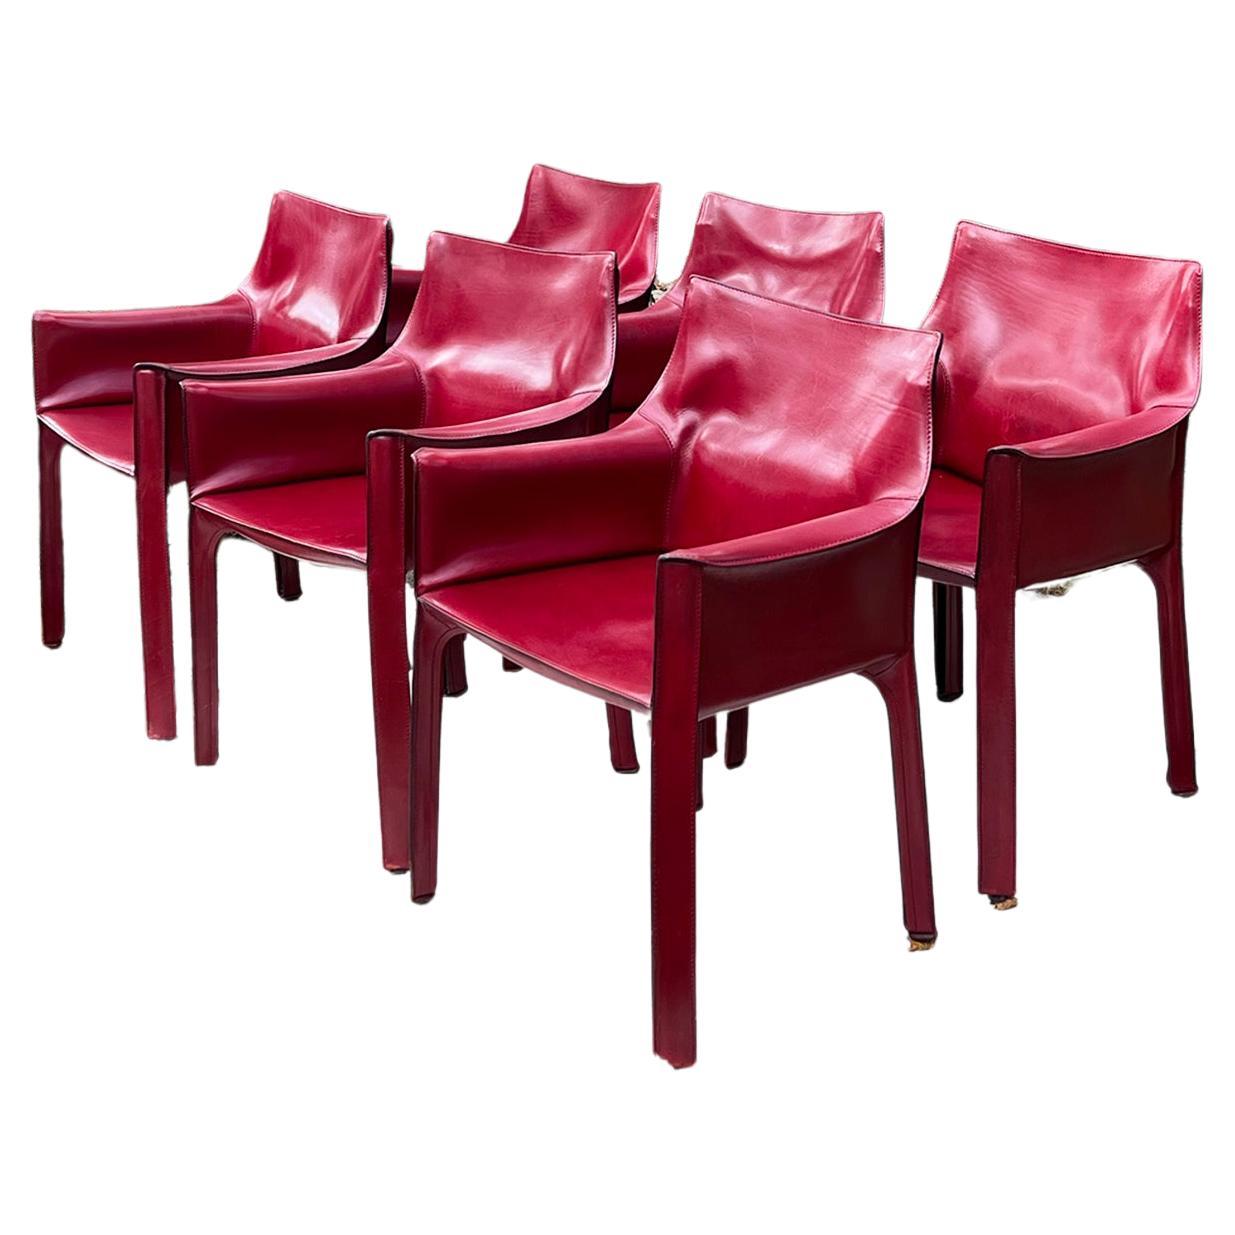 Set of Six Cab 414 Armchairs by Mario Bellini for Cassina in Oxblood Red Leather For Sale